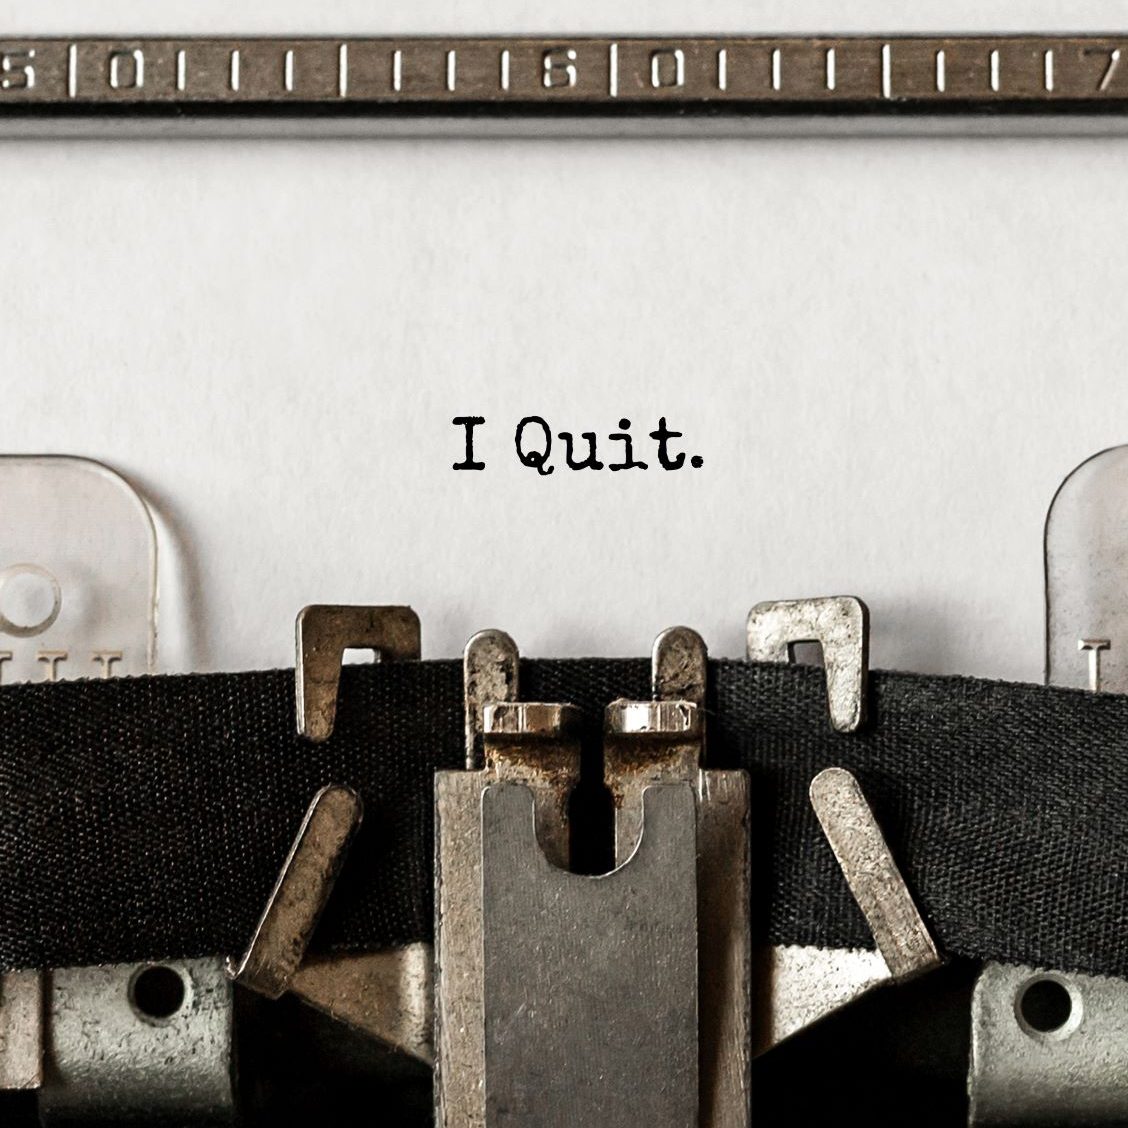 Close up shot of paper on a typewritter with the words "I quit."